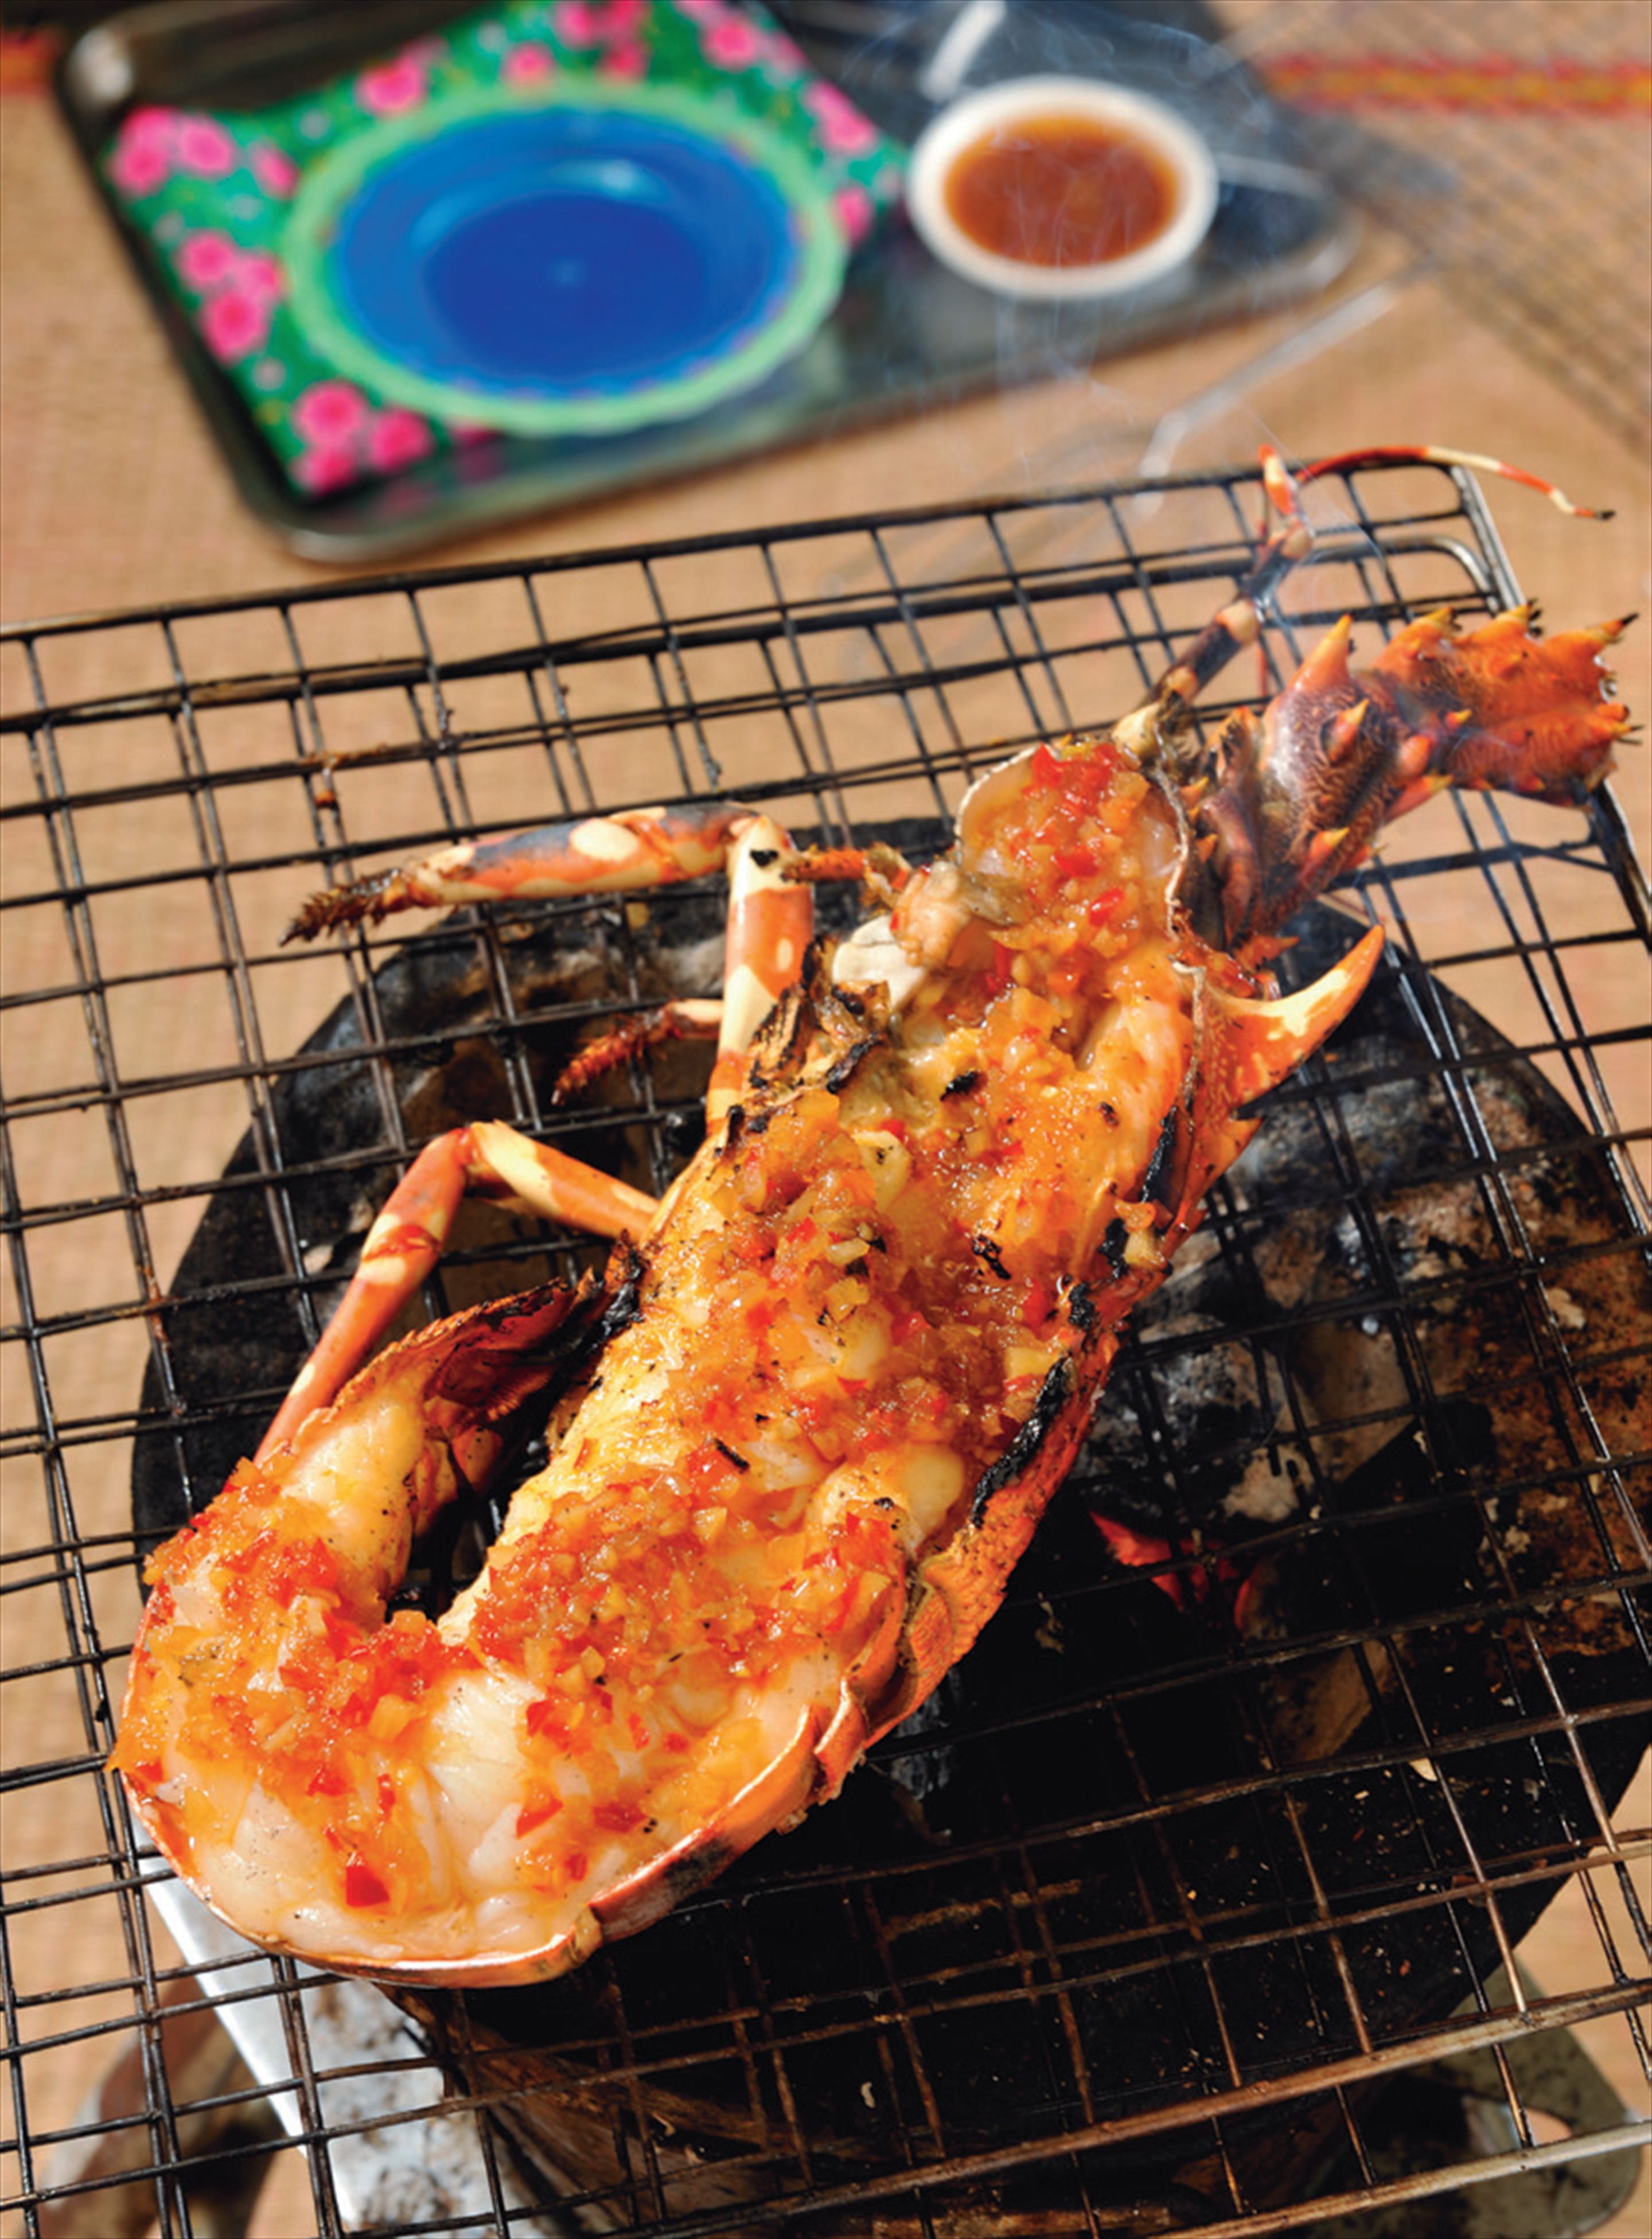 Barbecued crayfish with spicy satay sauce